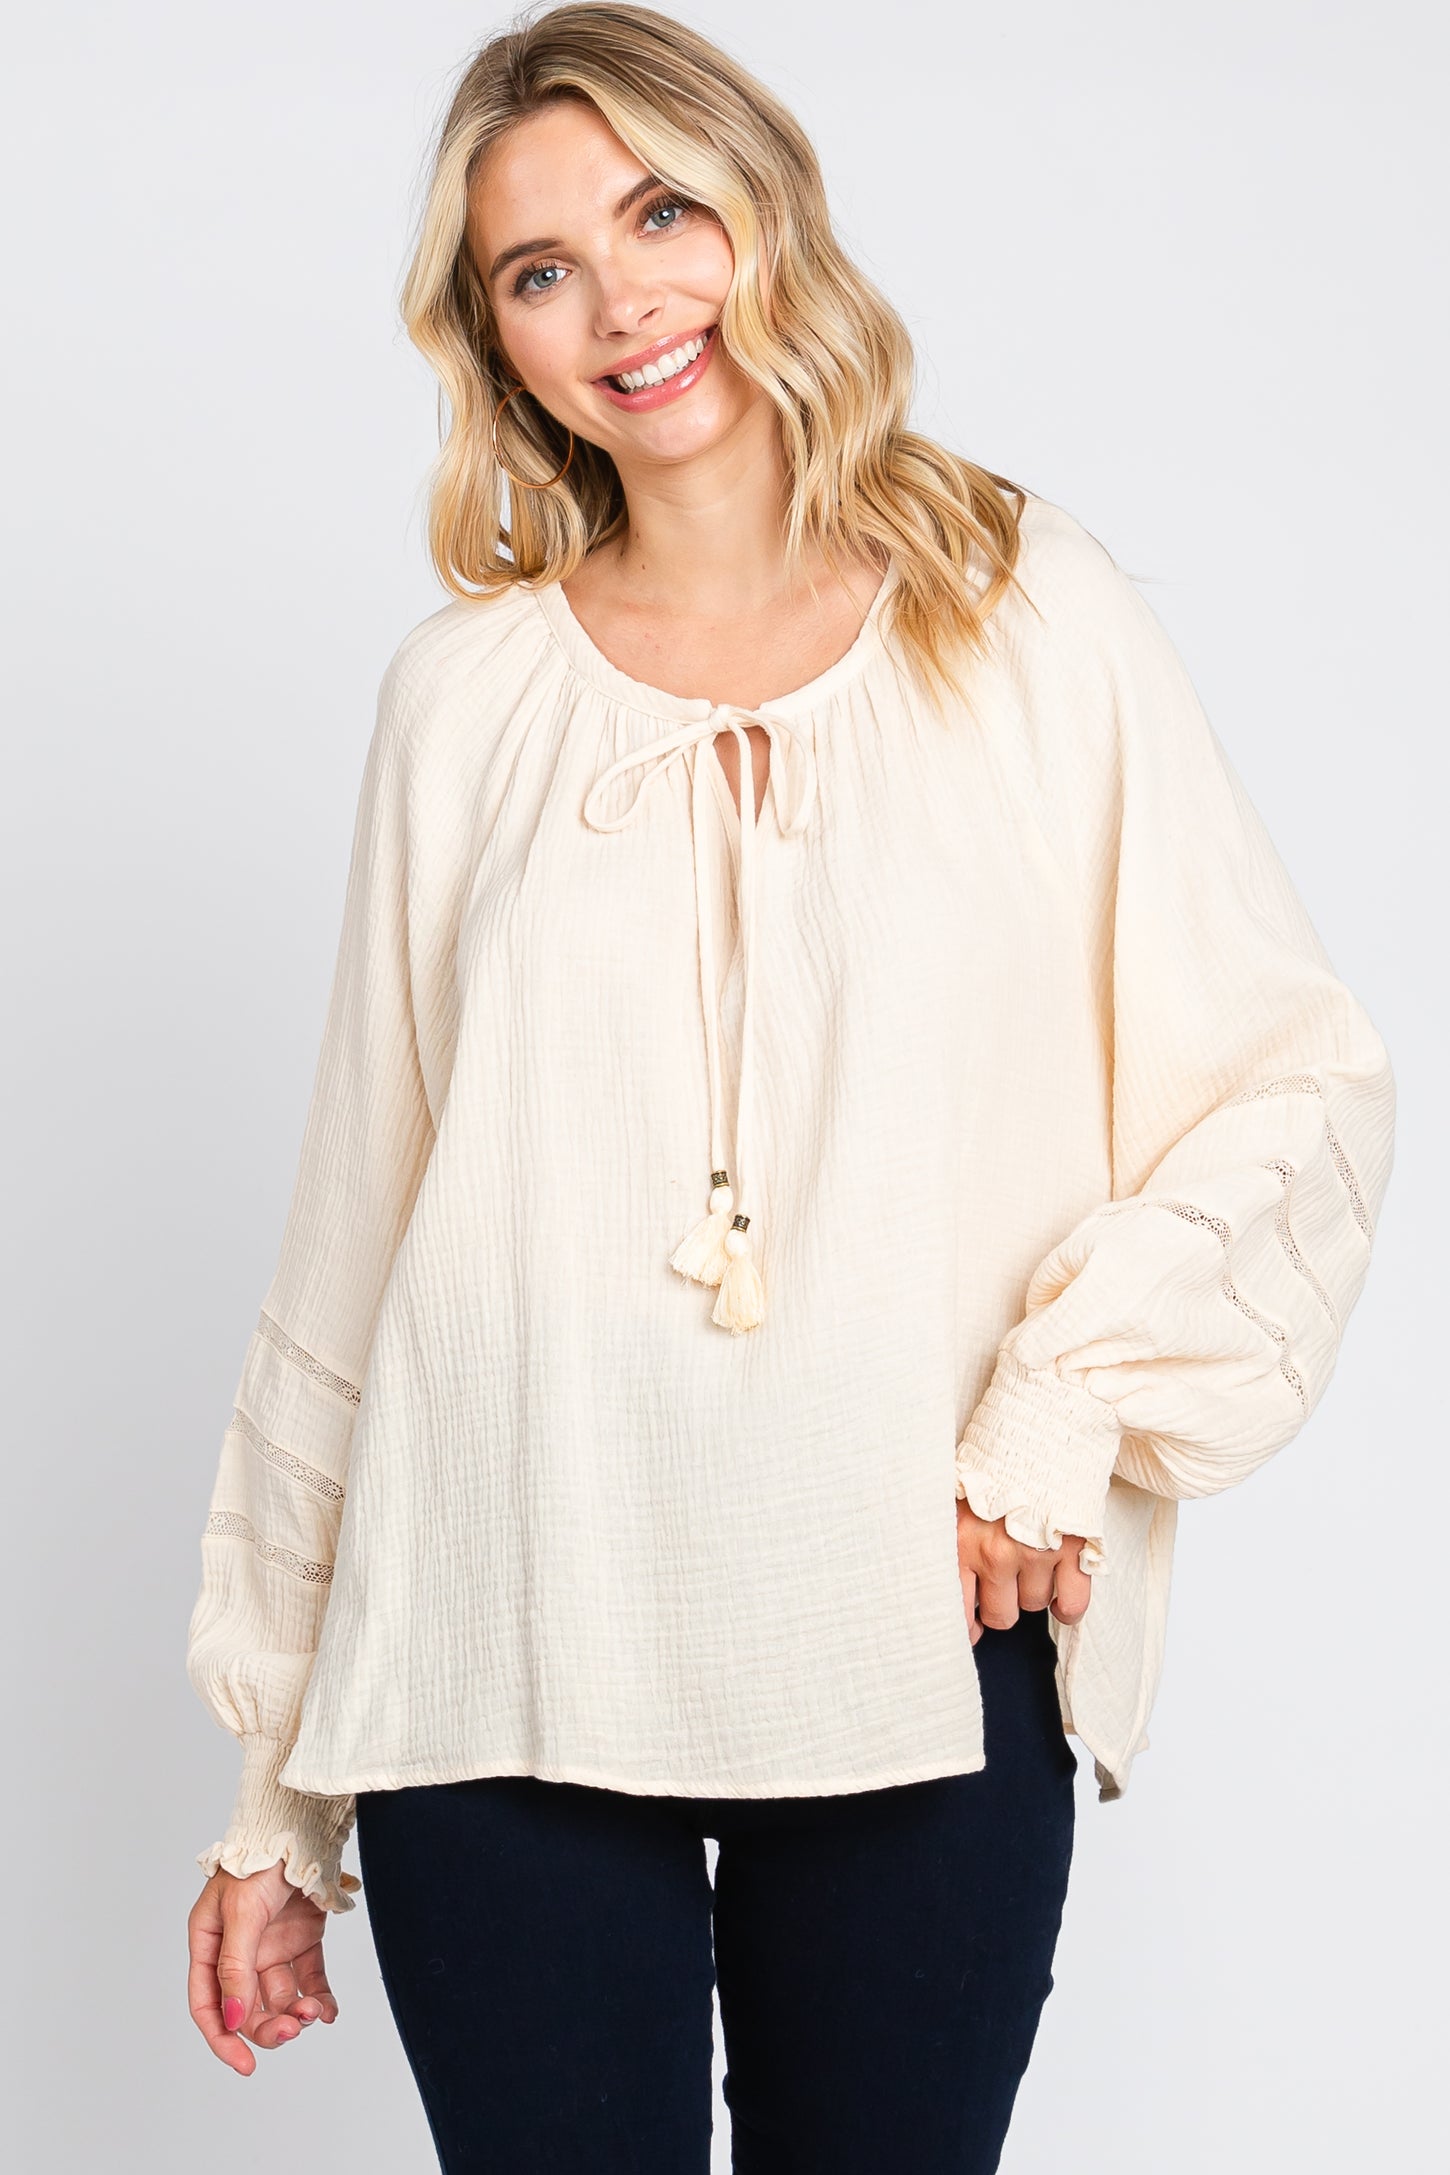 Cream Tie Front Long Sleeve Maternity Blouse